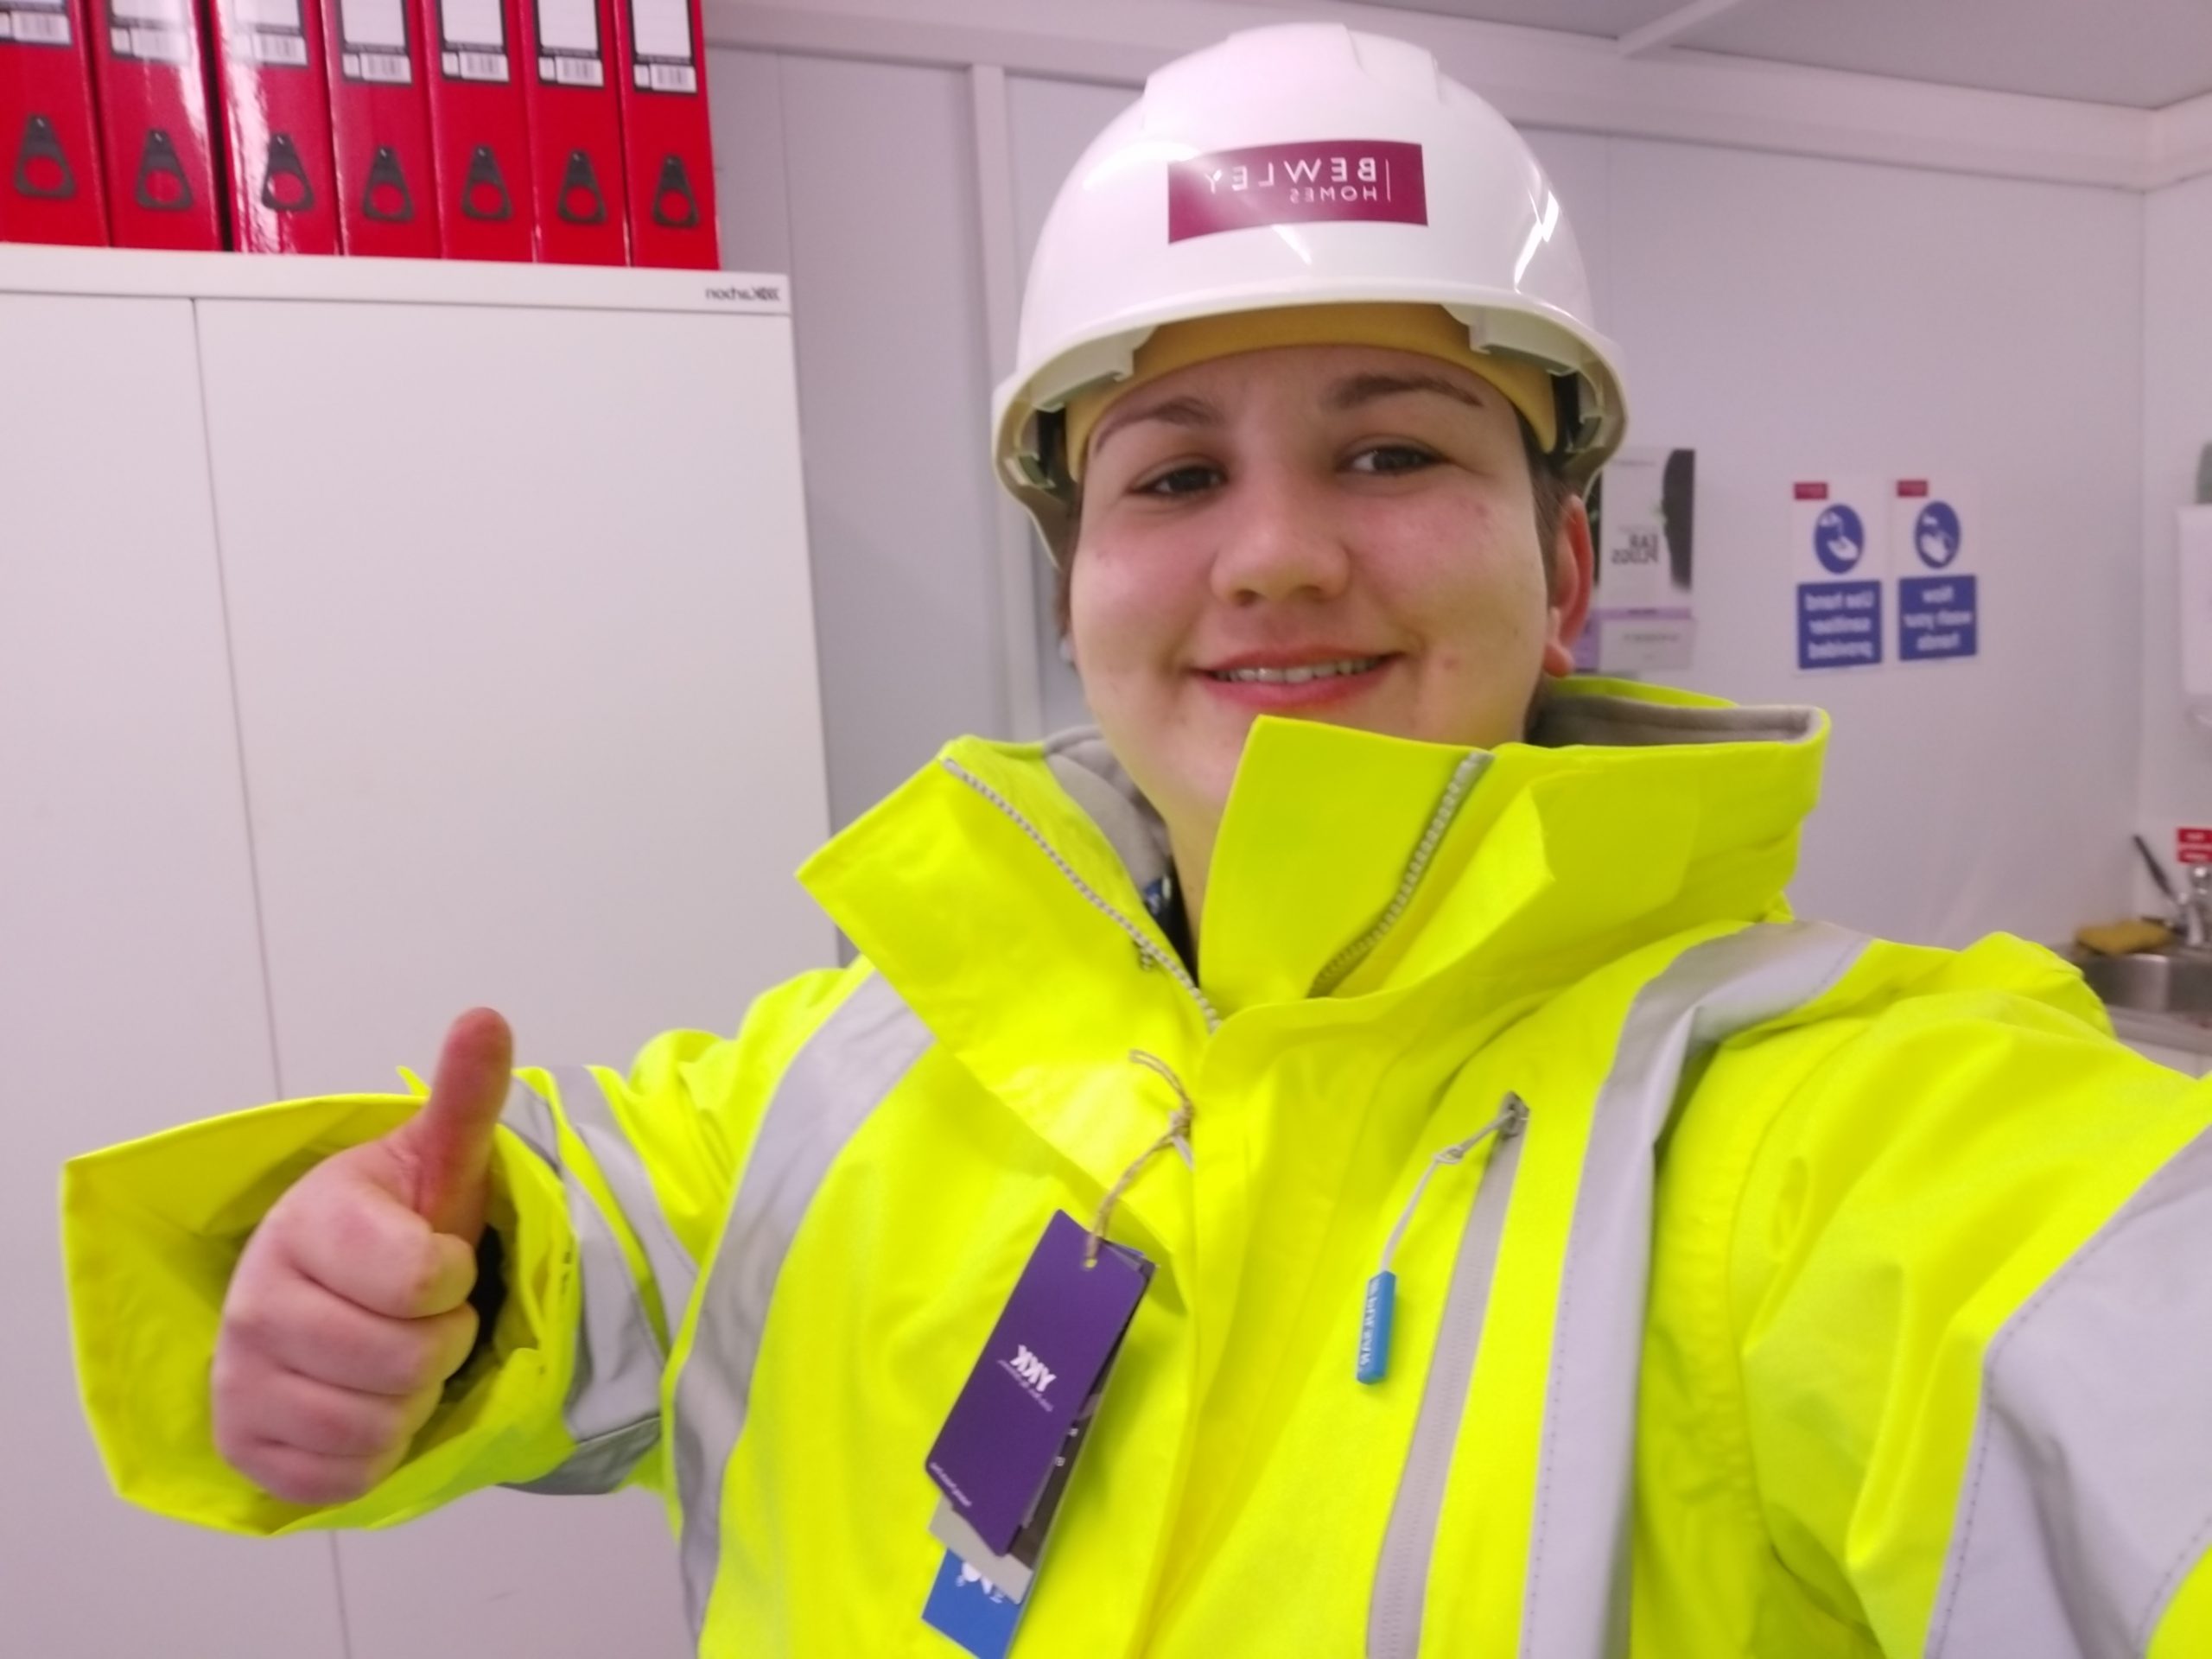 Torie in high vis giving a thumbs up